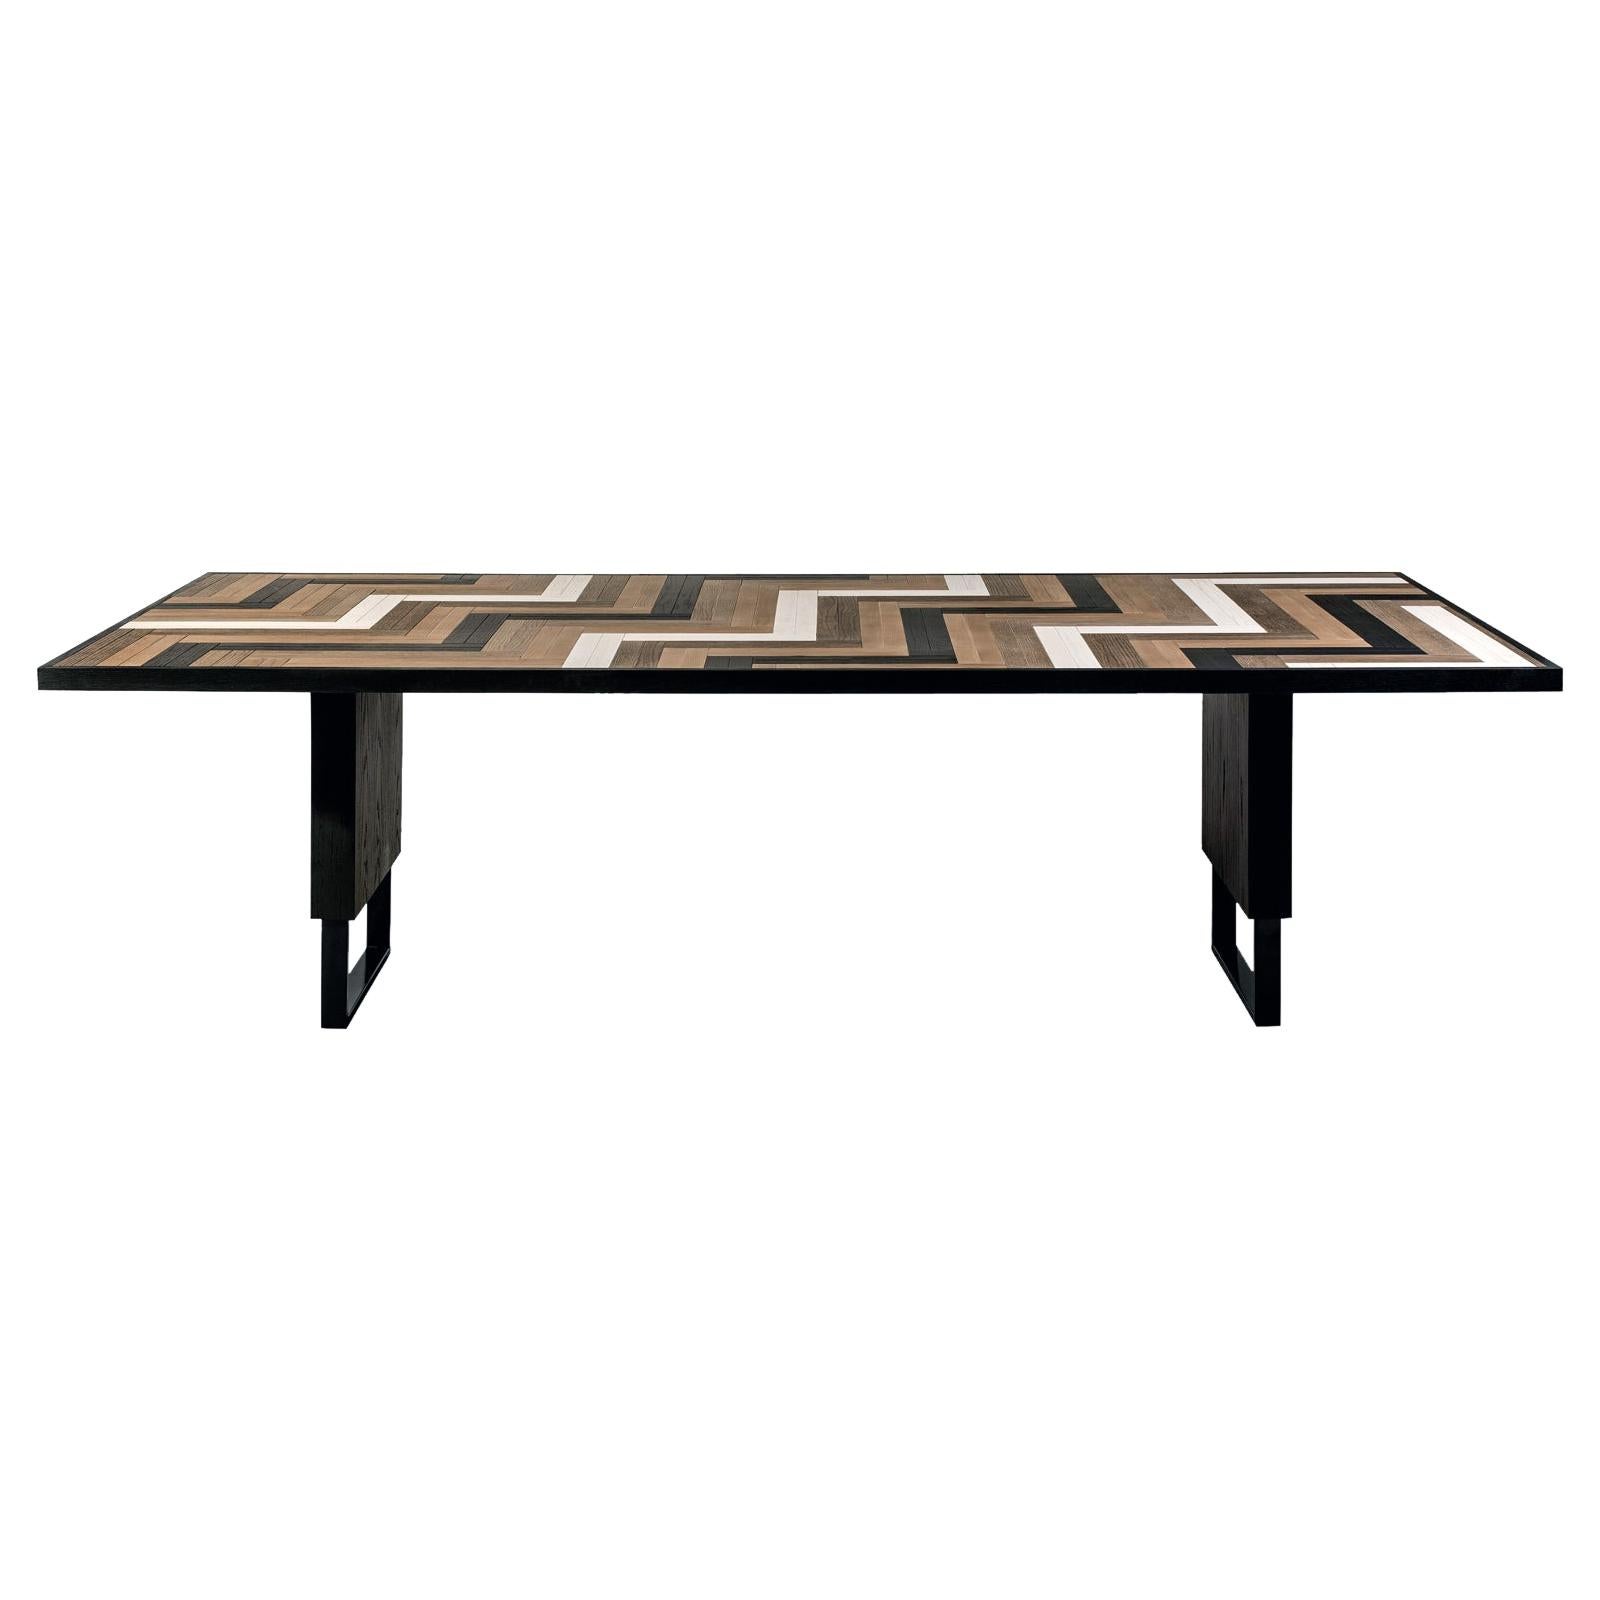 Domino Mid-Century Modern Dining Table by Larissa Batista For Sale